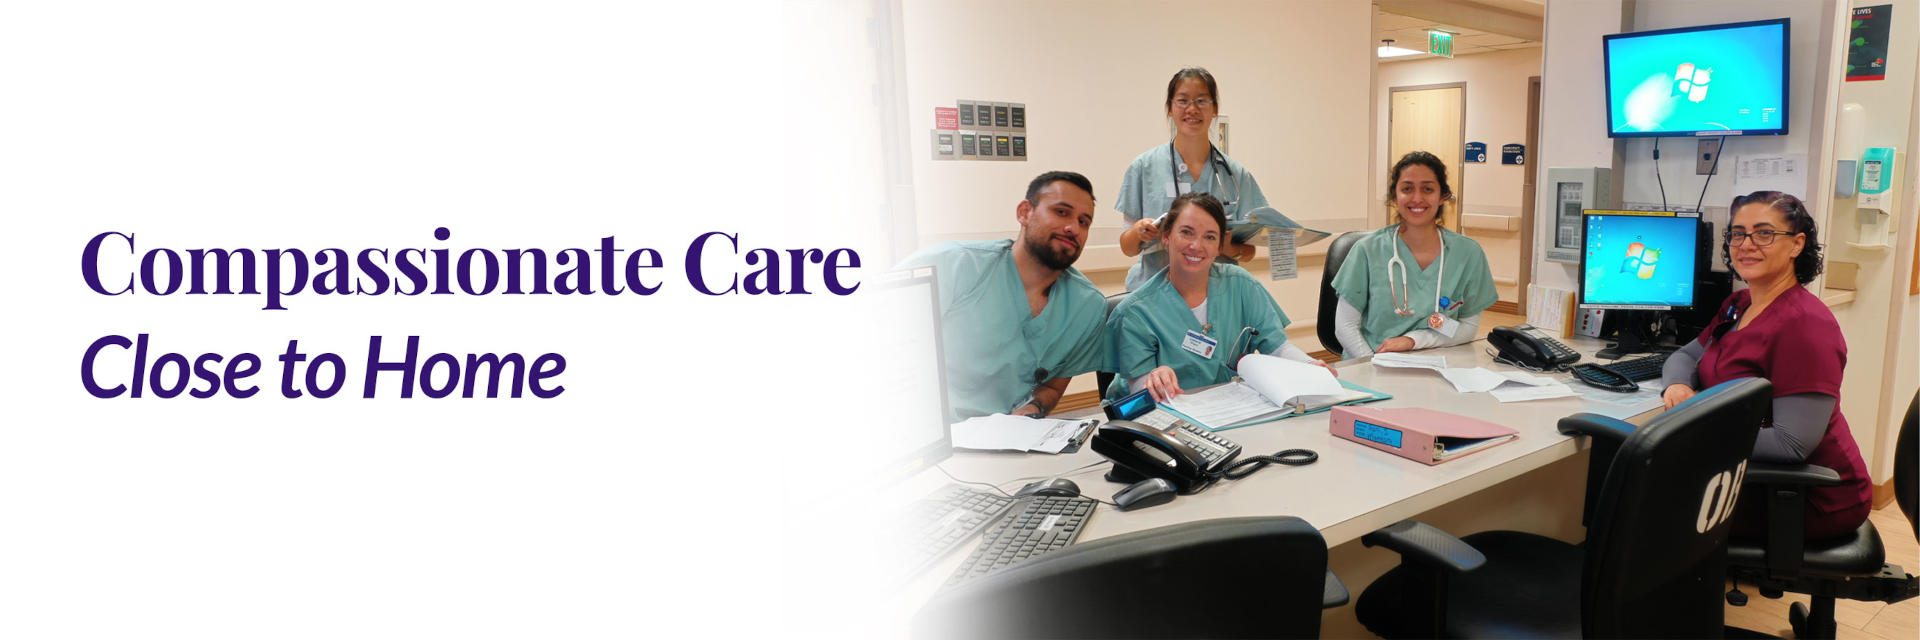 Banner picture of five smiling Nurses sitting at The Nurses Station. There are four females and one male.